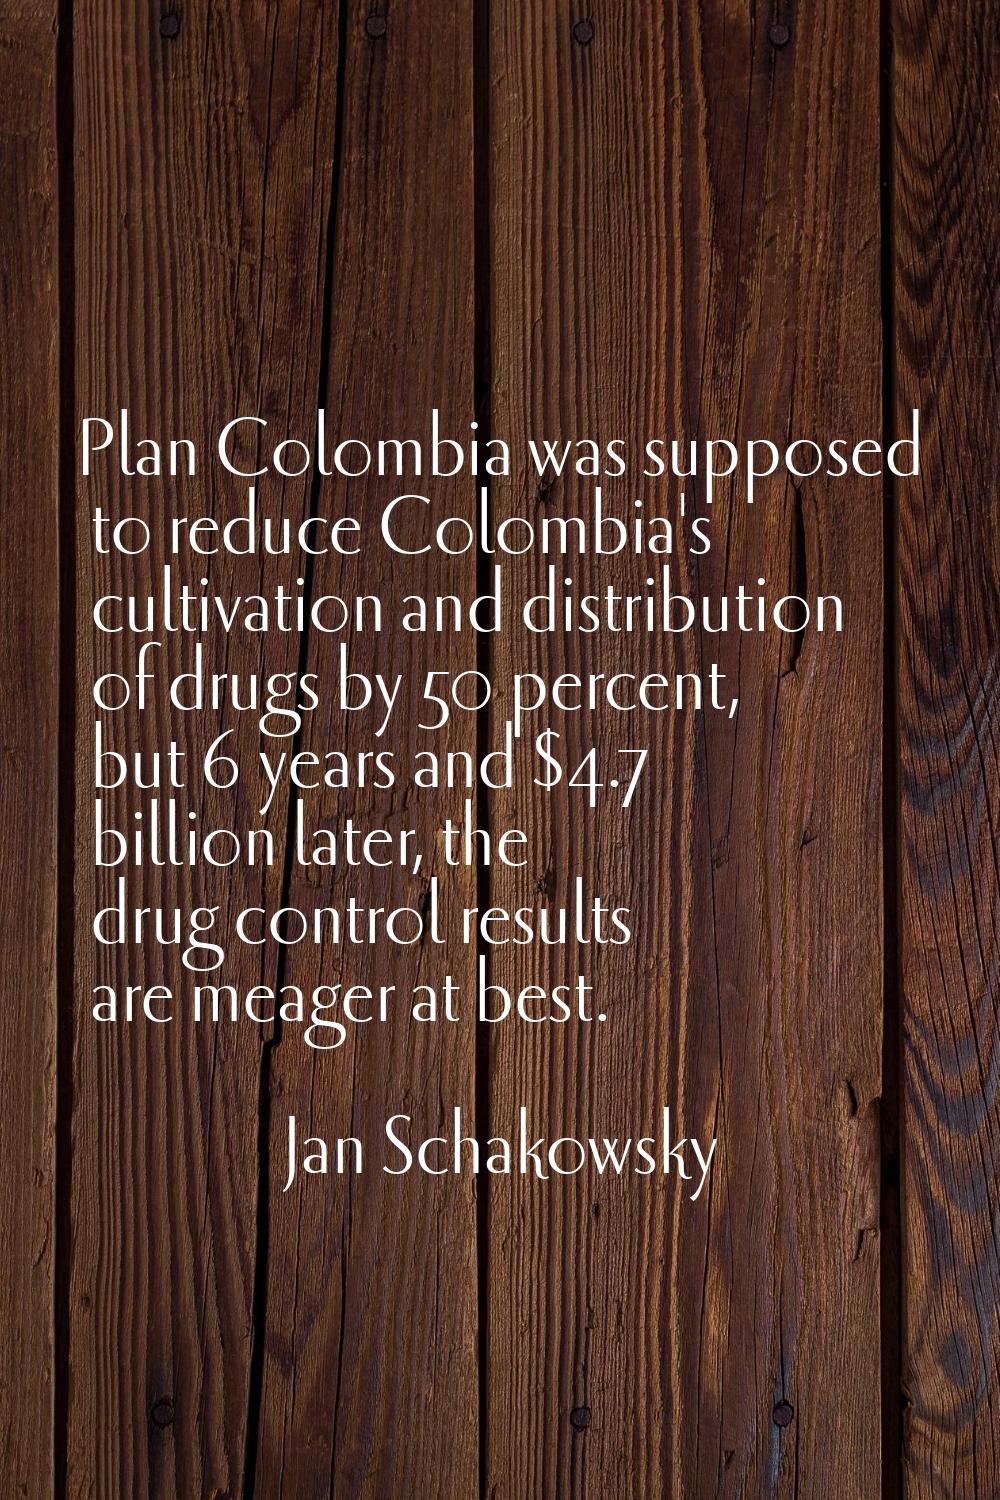 Plan Colombia was supposed to reduce Colombia's cultivation and distribution of drugs by 50 percent